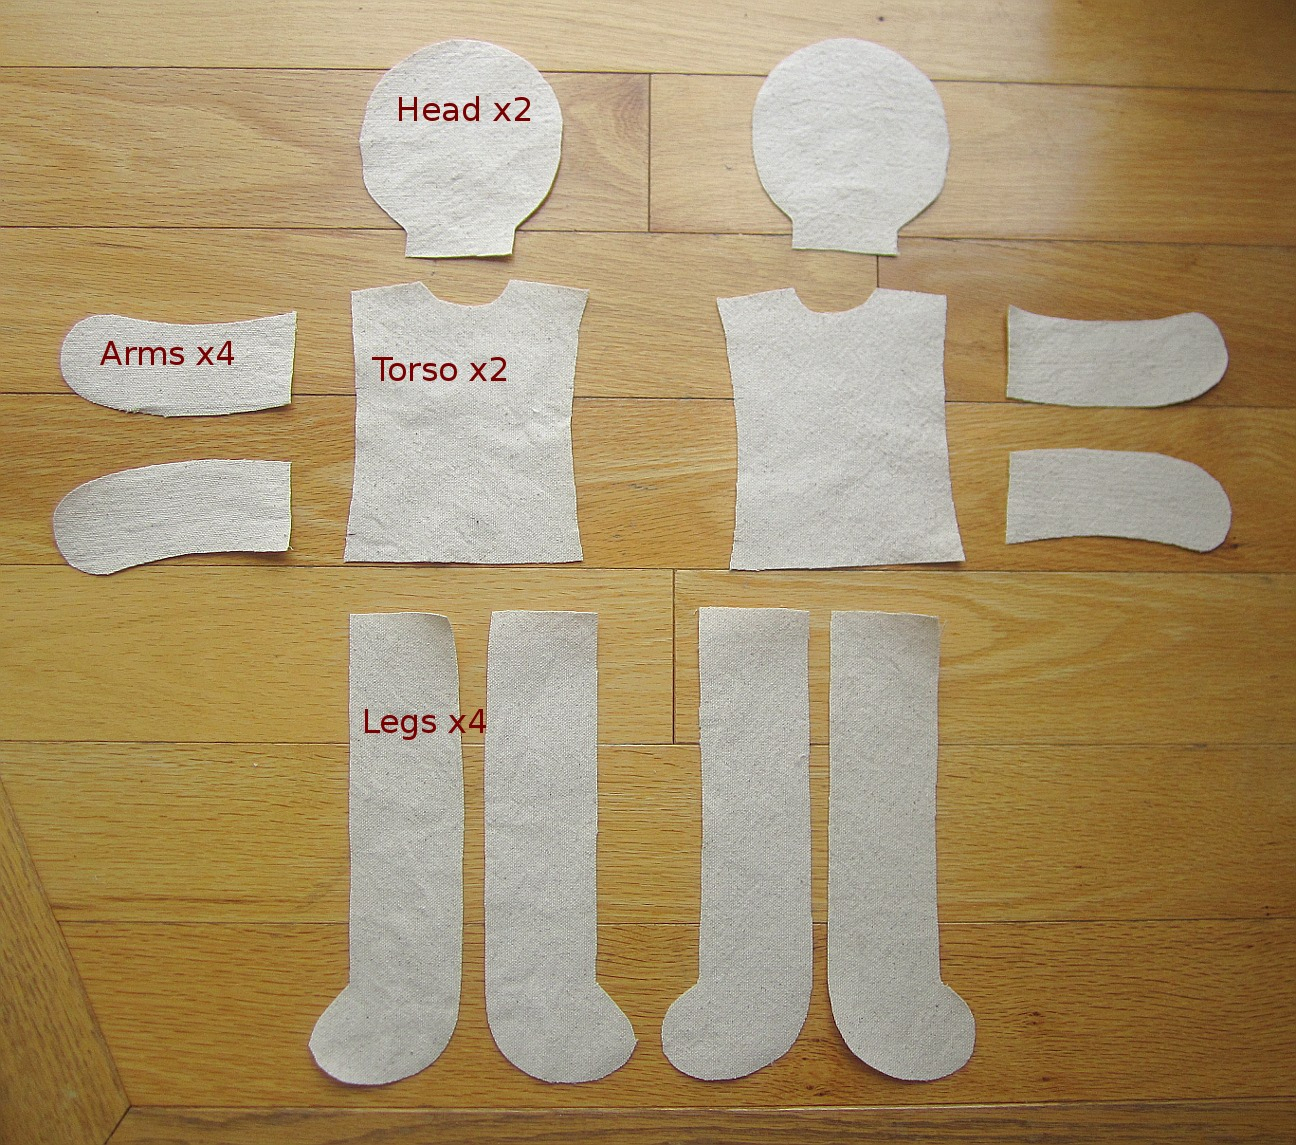 Rag Doll Free Sewing Pattern And Instructions – Amie Scott - Free Printable Cloth Doll Sewing Patterns